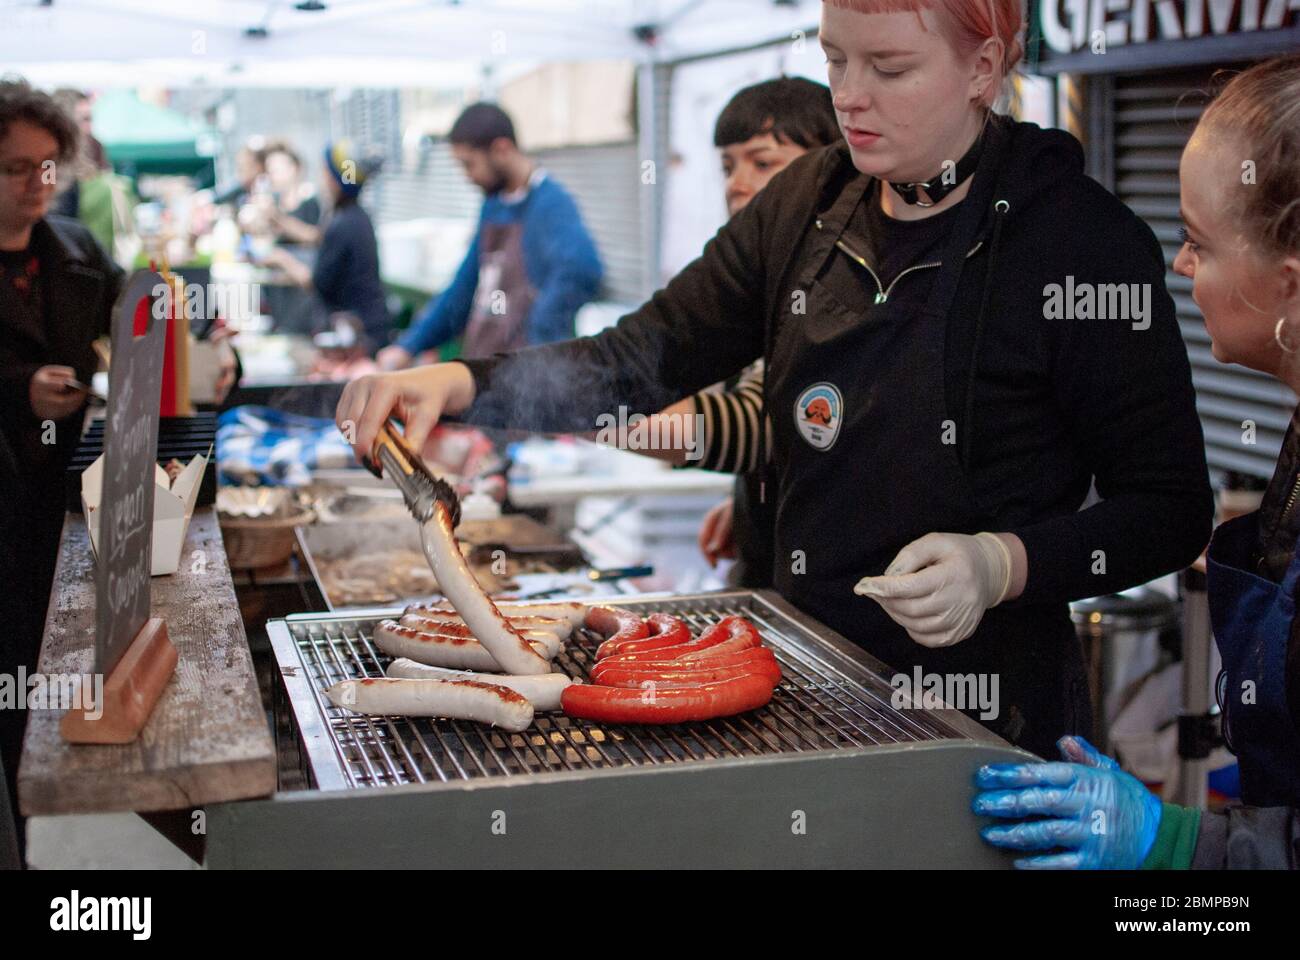 A woman grilling sausage for sale at the Maltby Street Market in London. Stock Photo